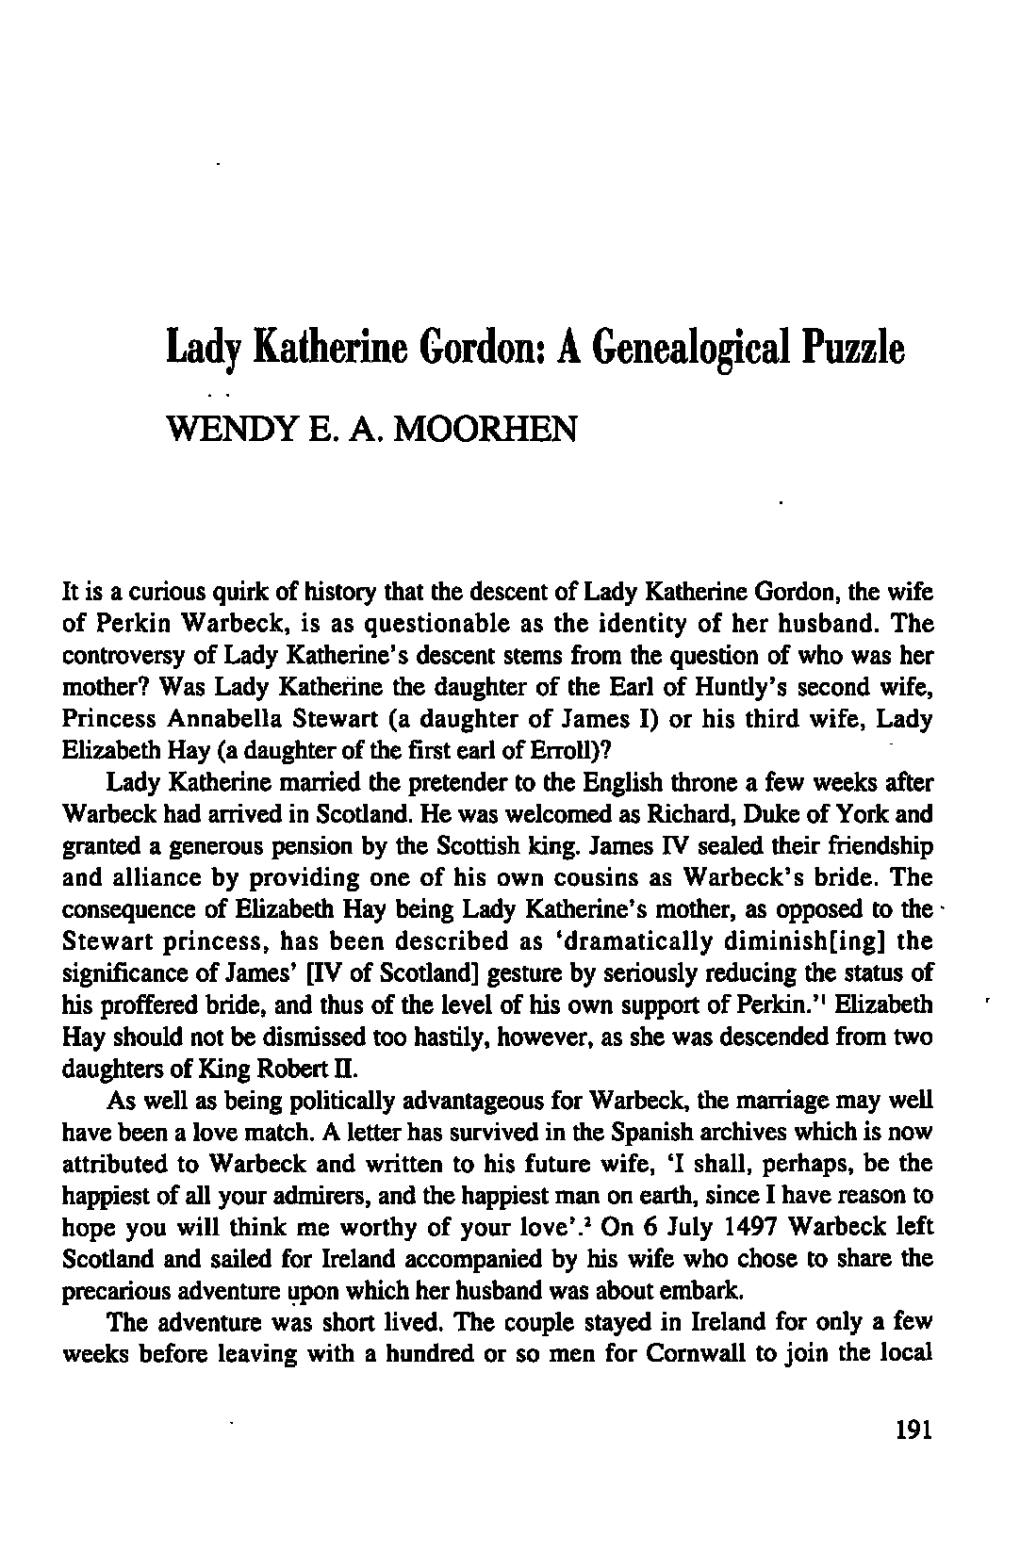 Lady Katherine Gordon, the Wife of Perkin Warbeck, Is As Questionable As the Identity of Her Husband